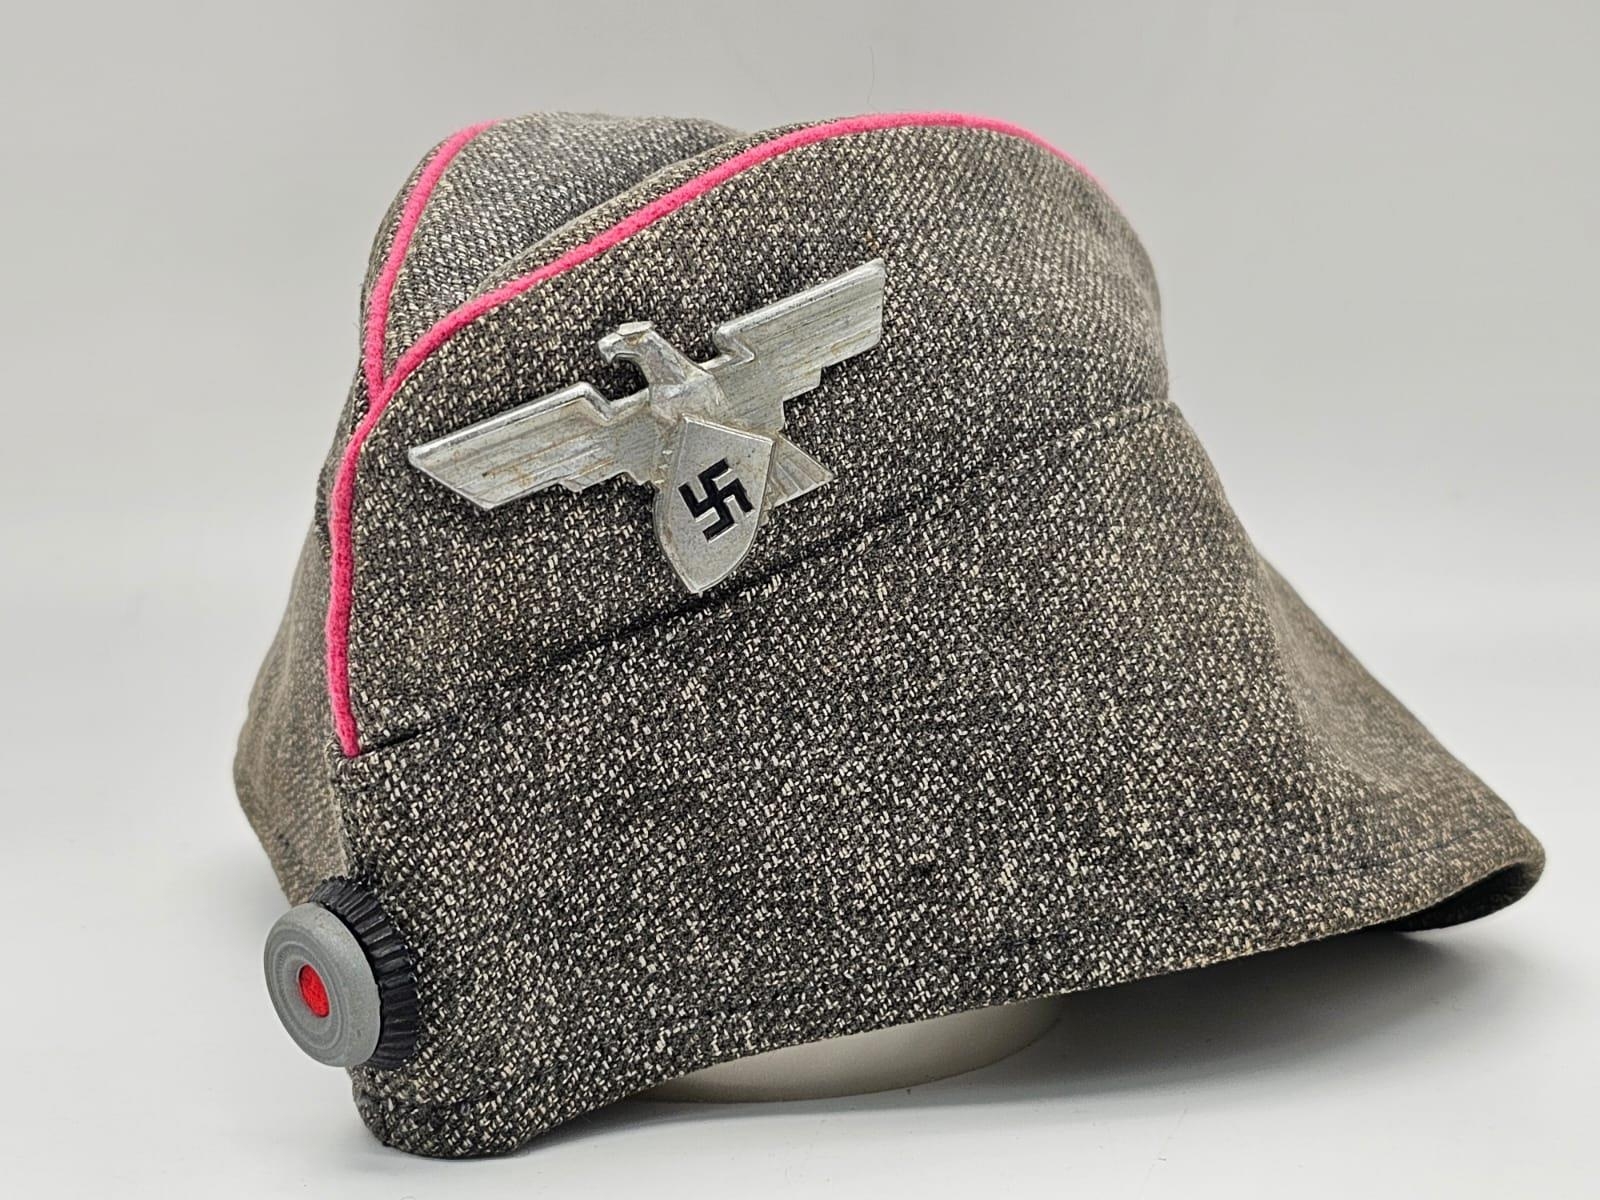 A very rare 3rd Reich Ordnungspolizei (Order Police) side cap which was for security of Factory’s